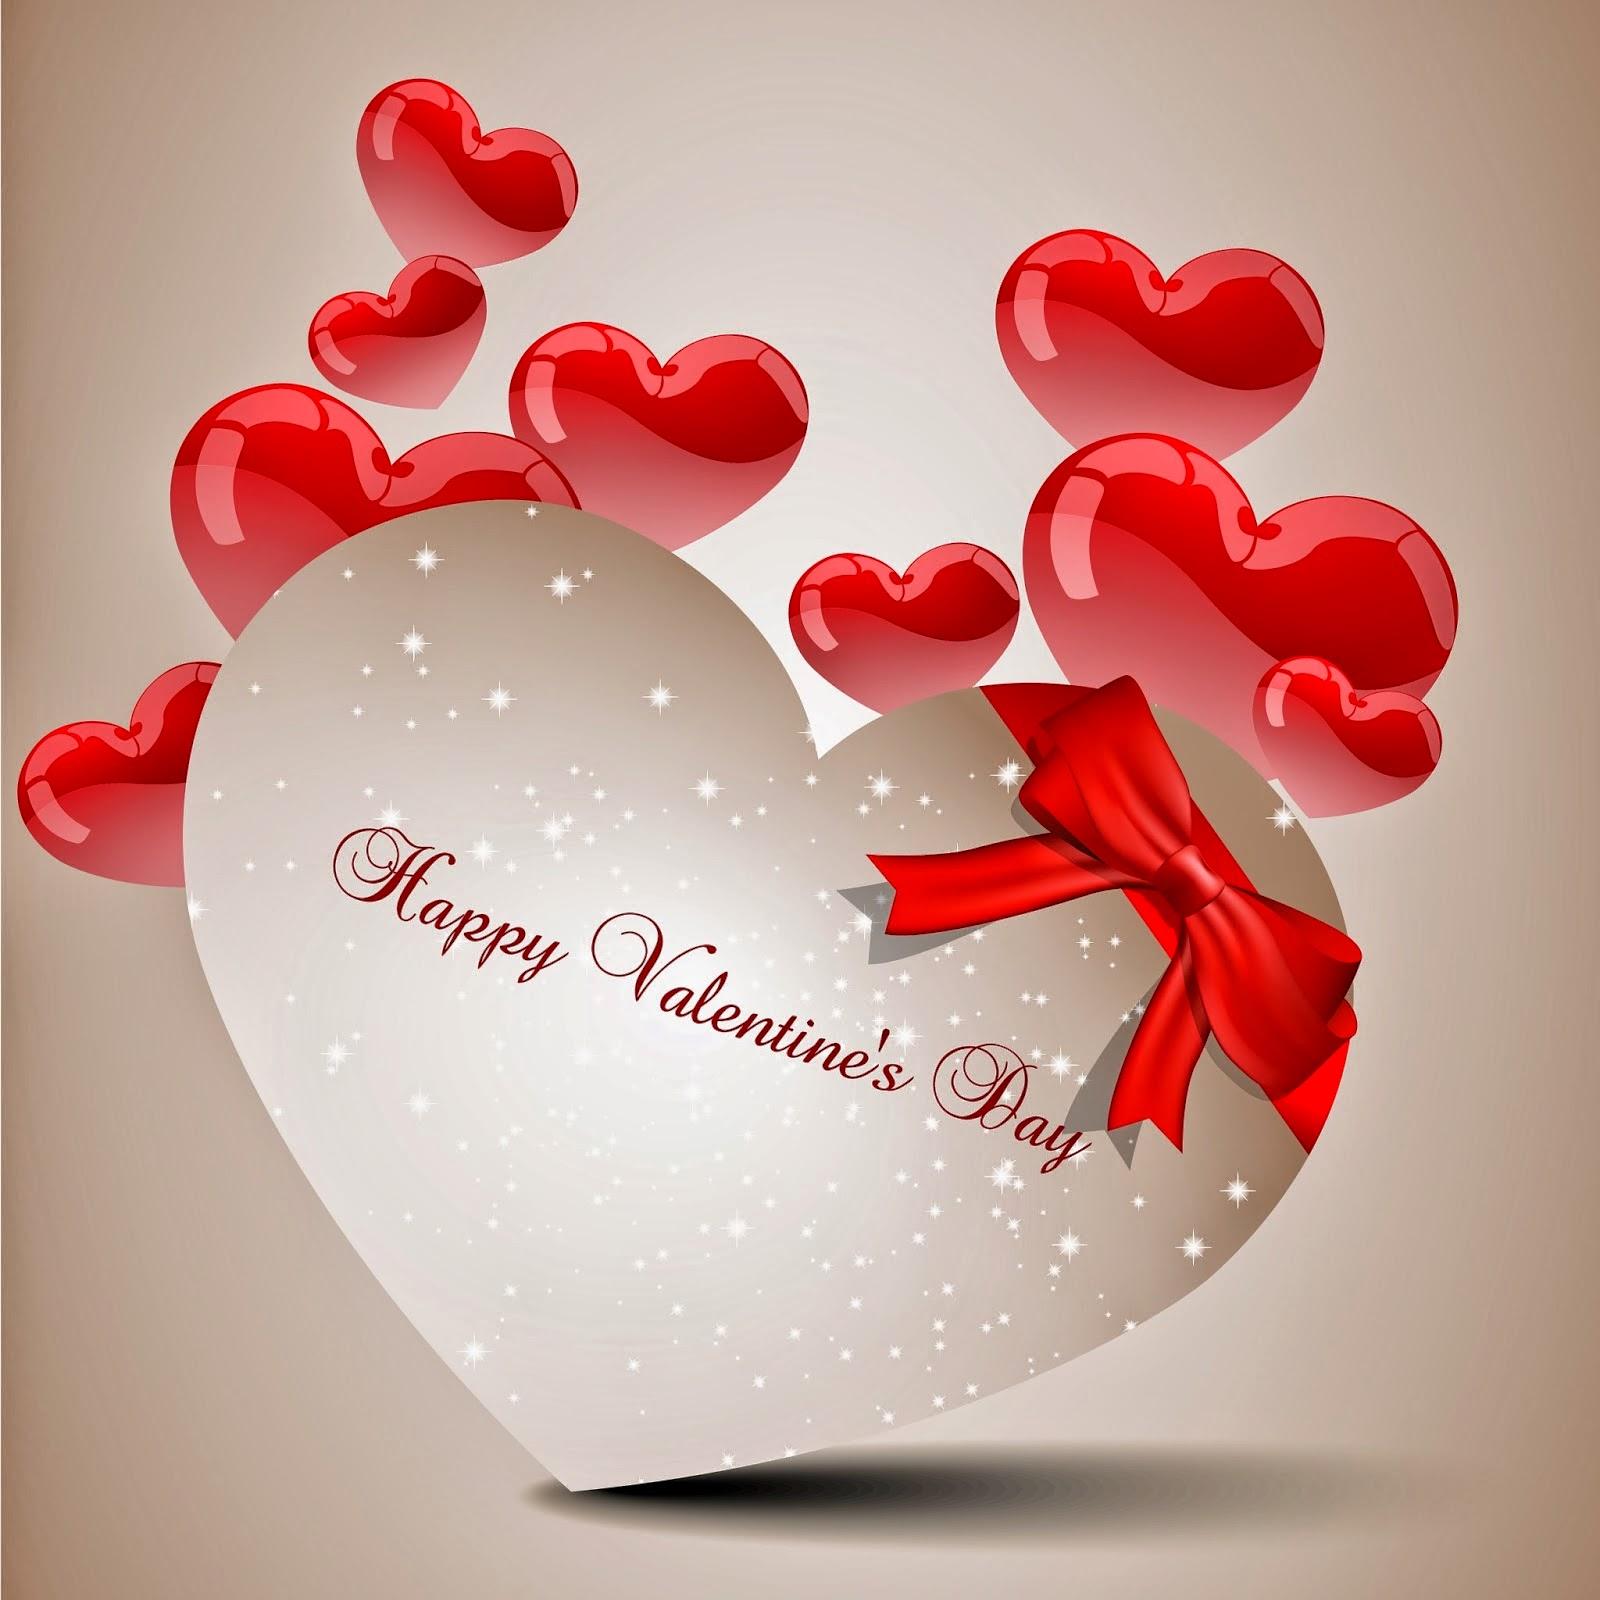 Valentines Day Image For Whatsapp Dp Profile Wallpaper on Original